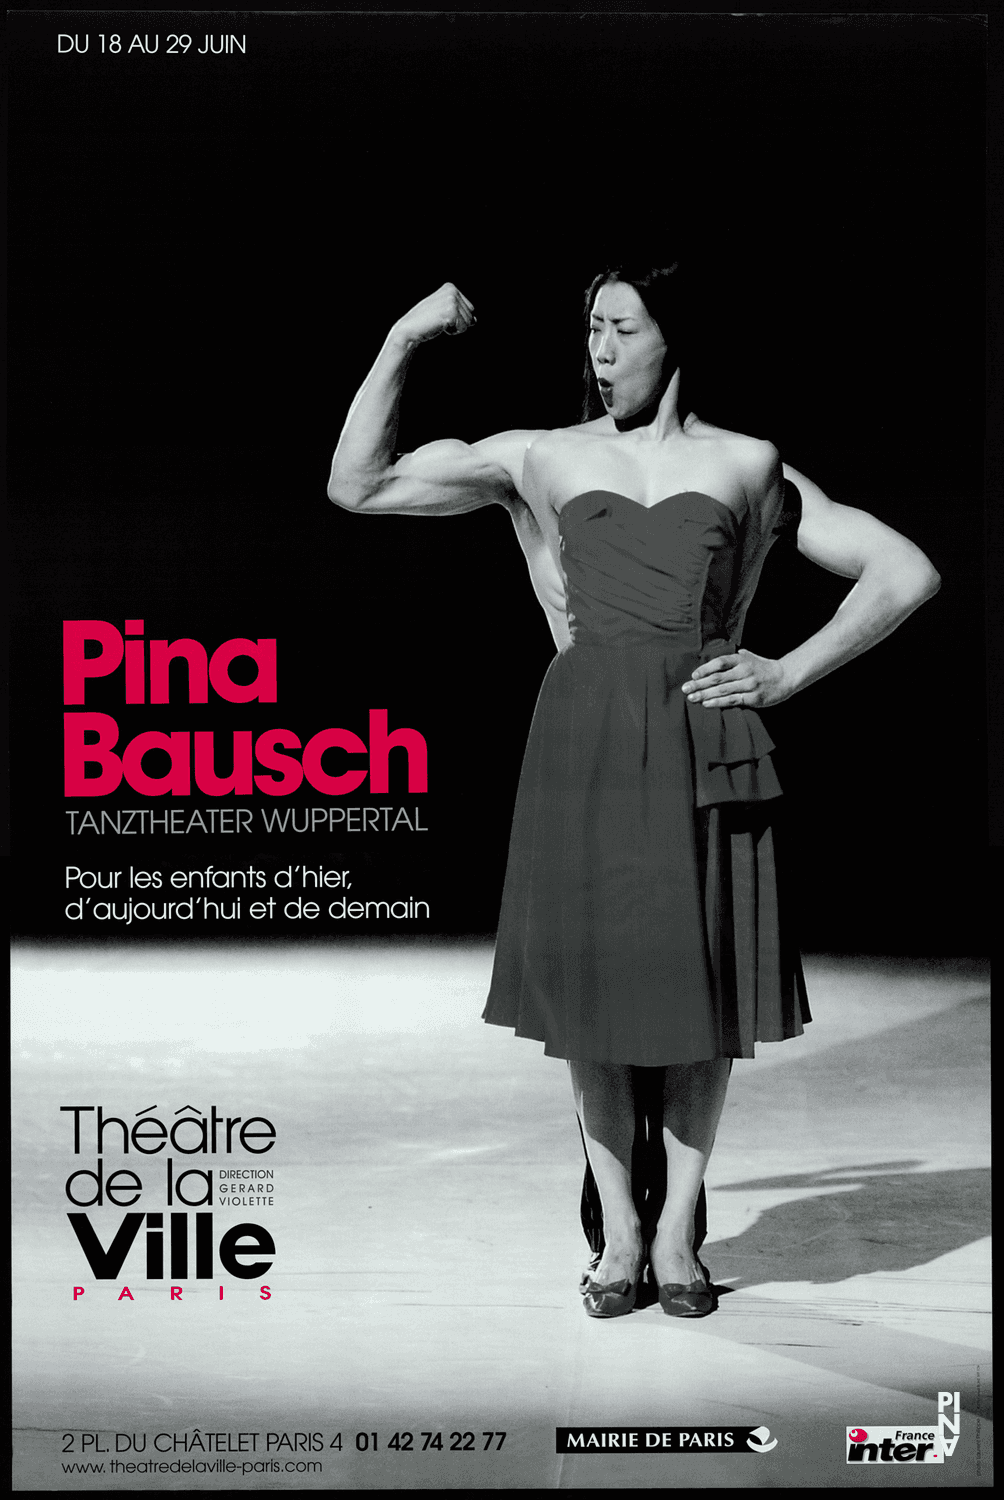 Poster for “For the Children of Yesterday, Today and Tomorrow” by Pina Bausch in Paris, 06/18/2003 – 06/29/2003